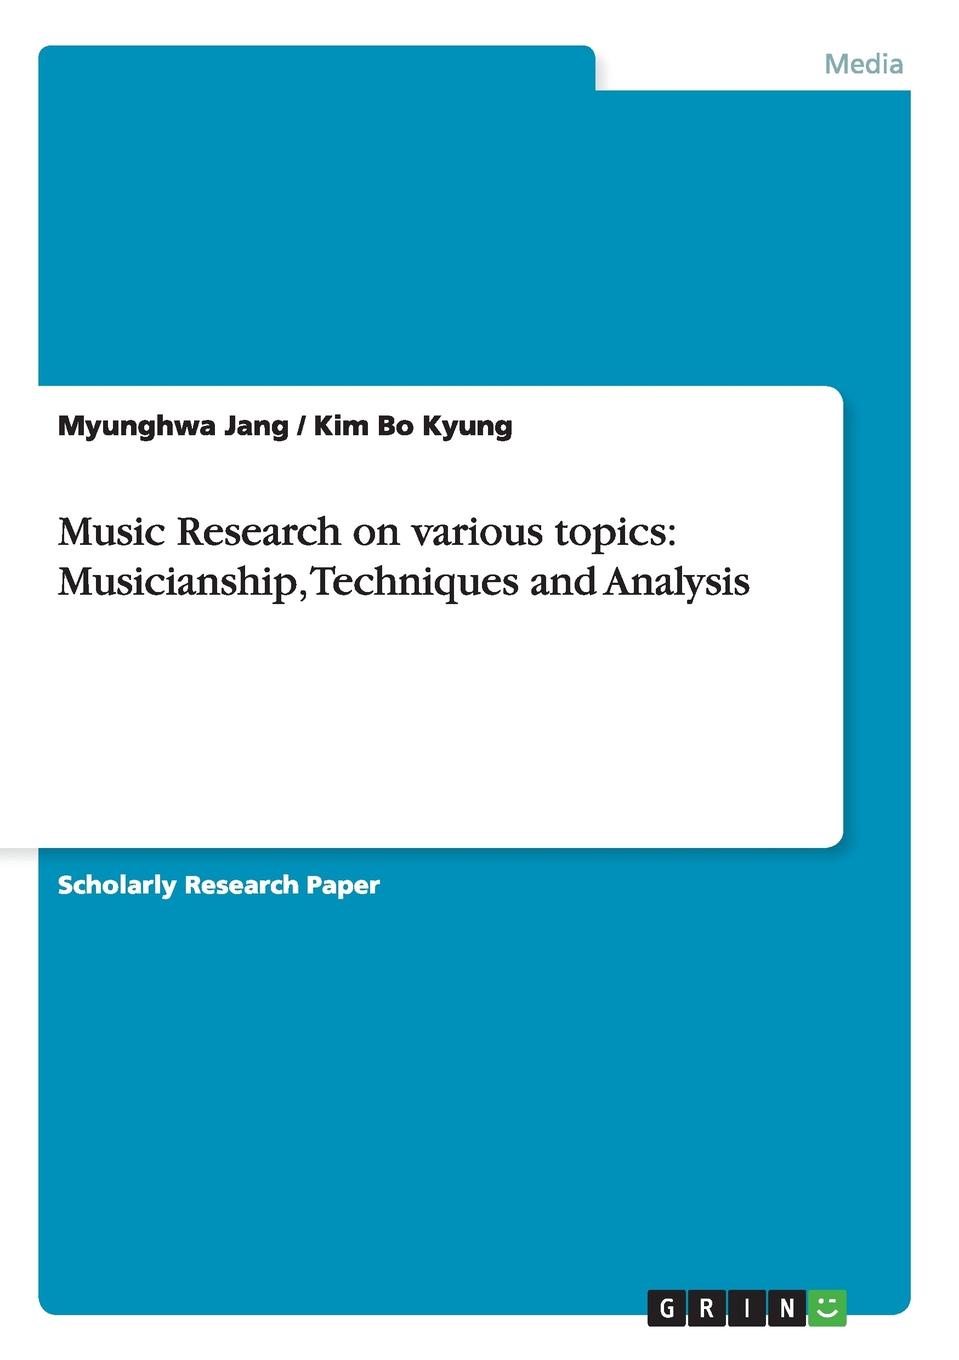 Music Research on various topics. Musicianship, Techniques and Analysis